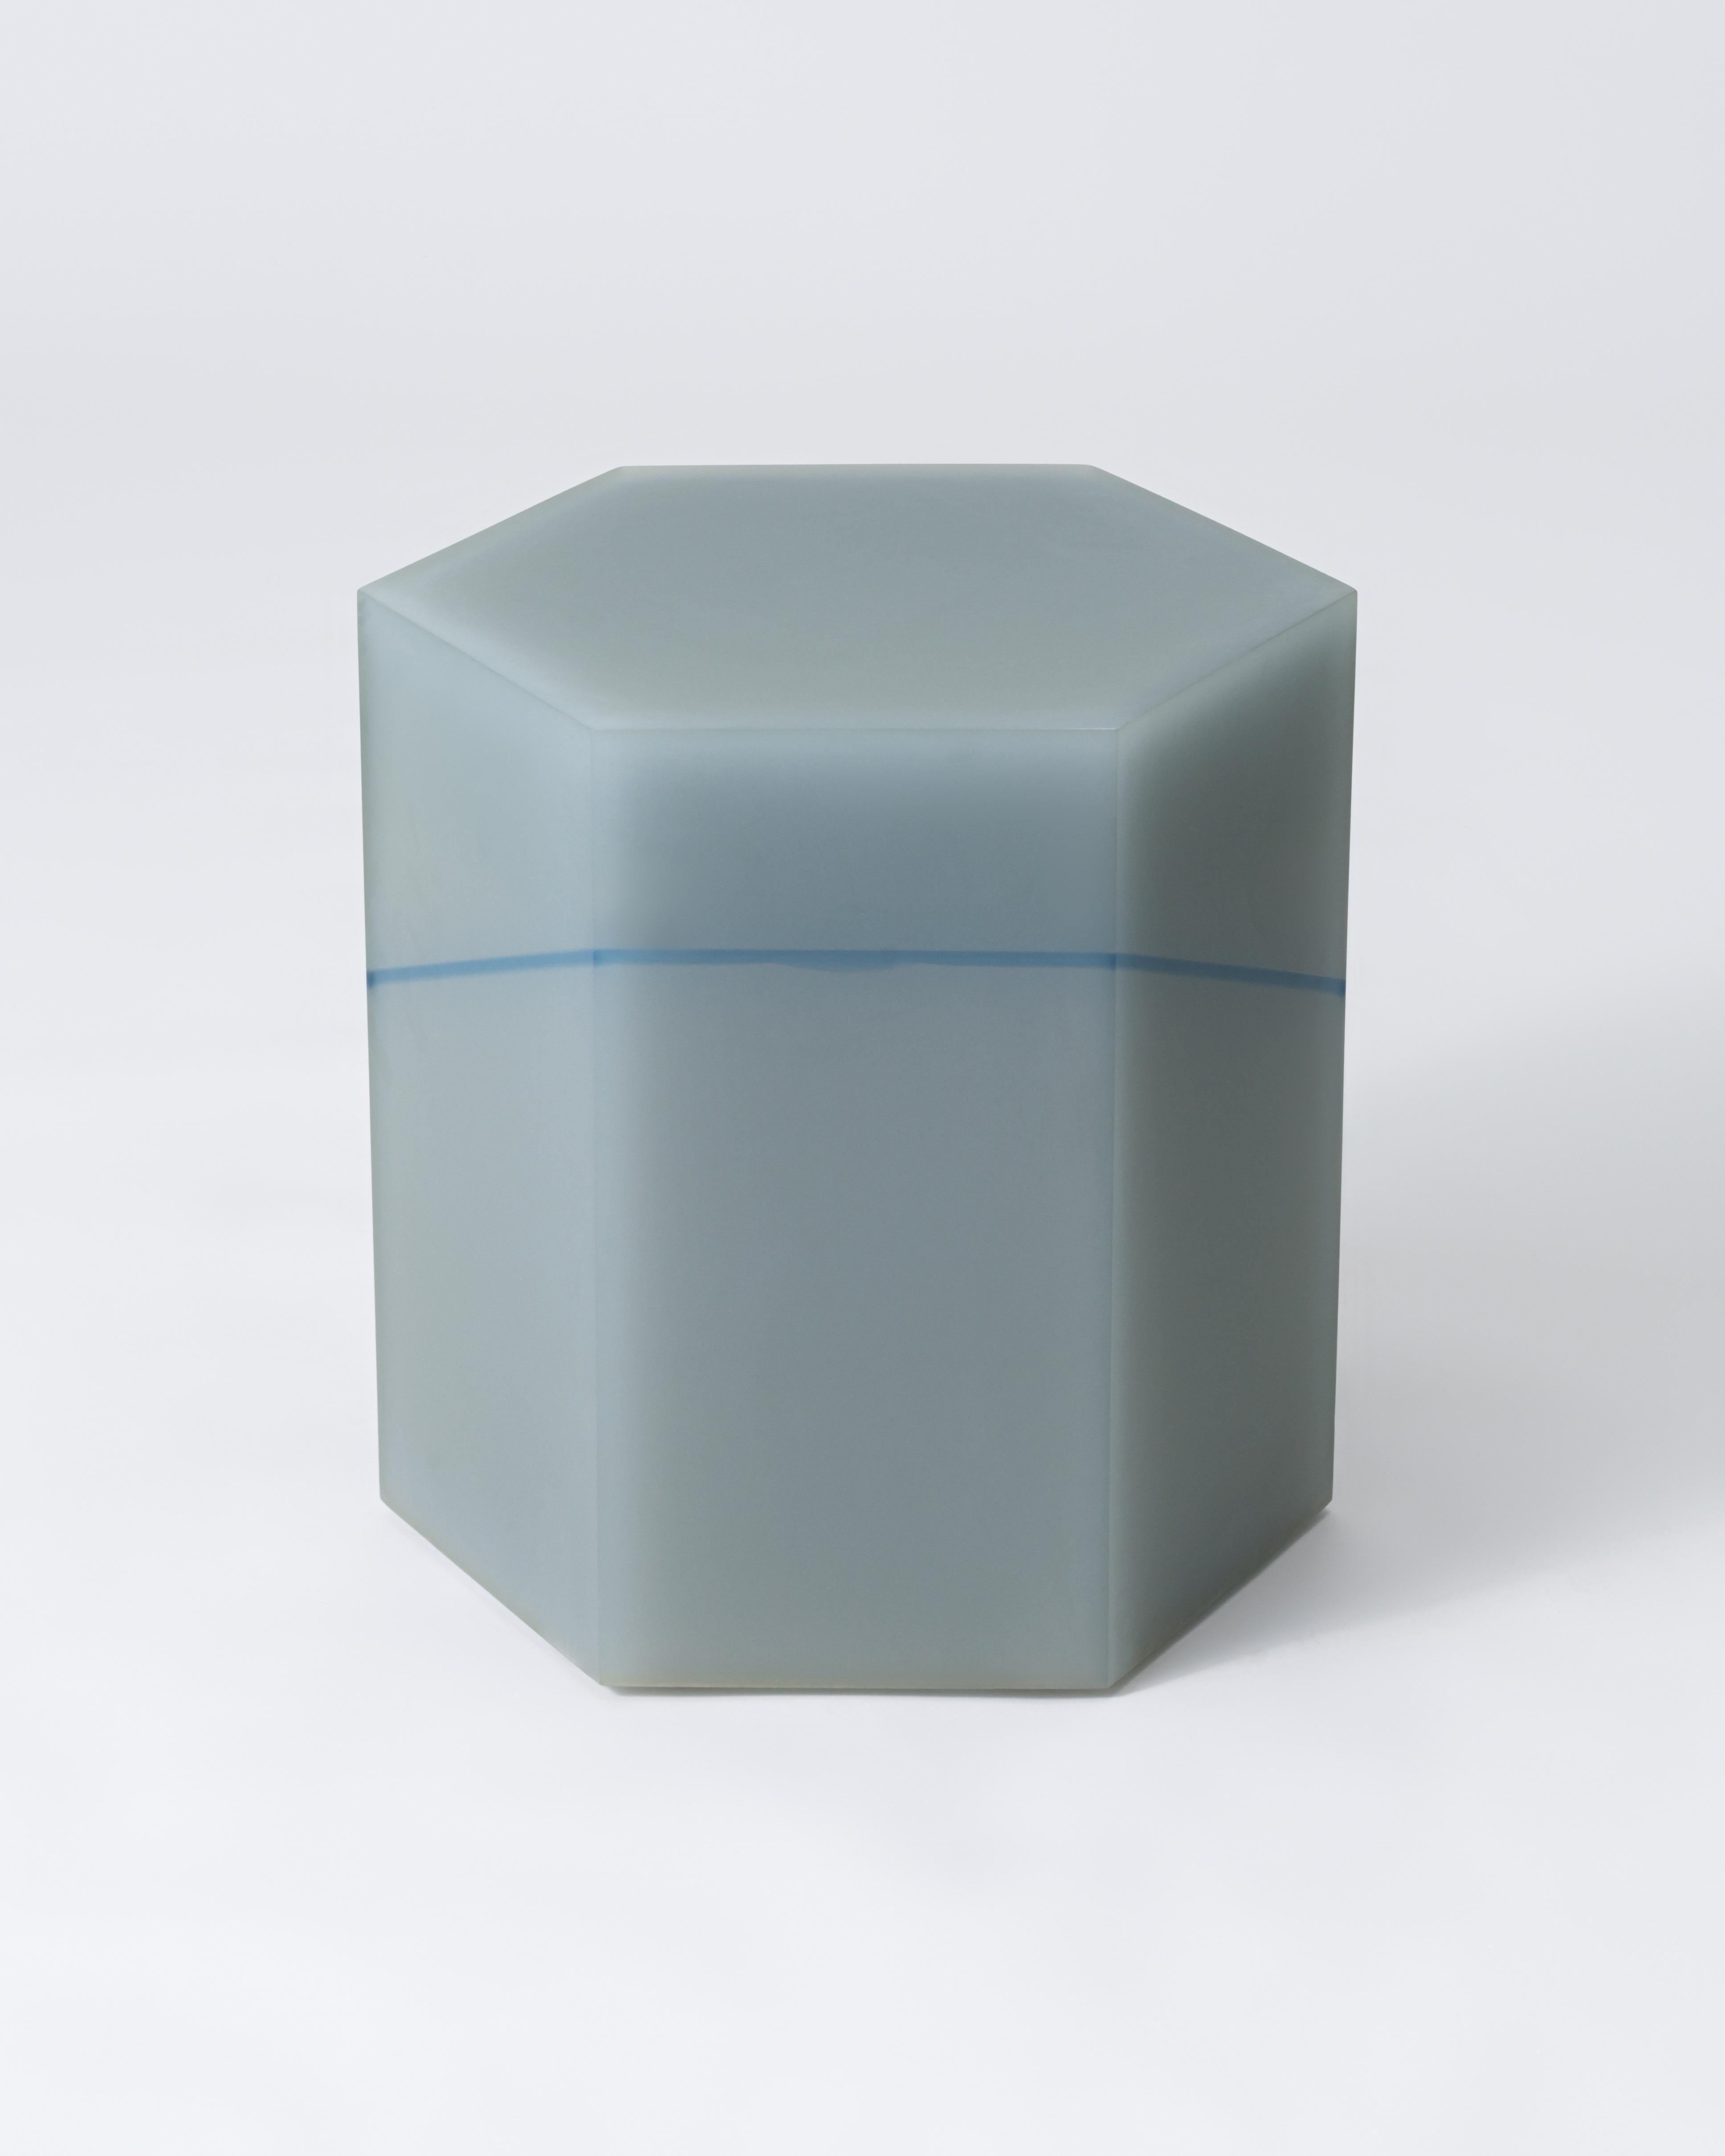 American Blue Line Hex Box Resin Side Table/Stool Gray by Facture, REP by Tuleste Factory For Sale